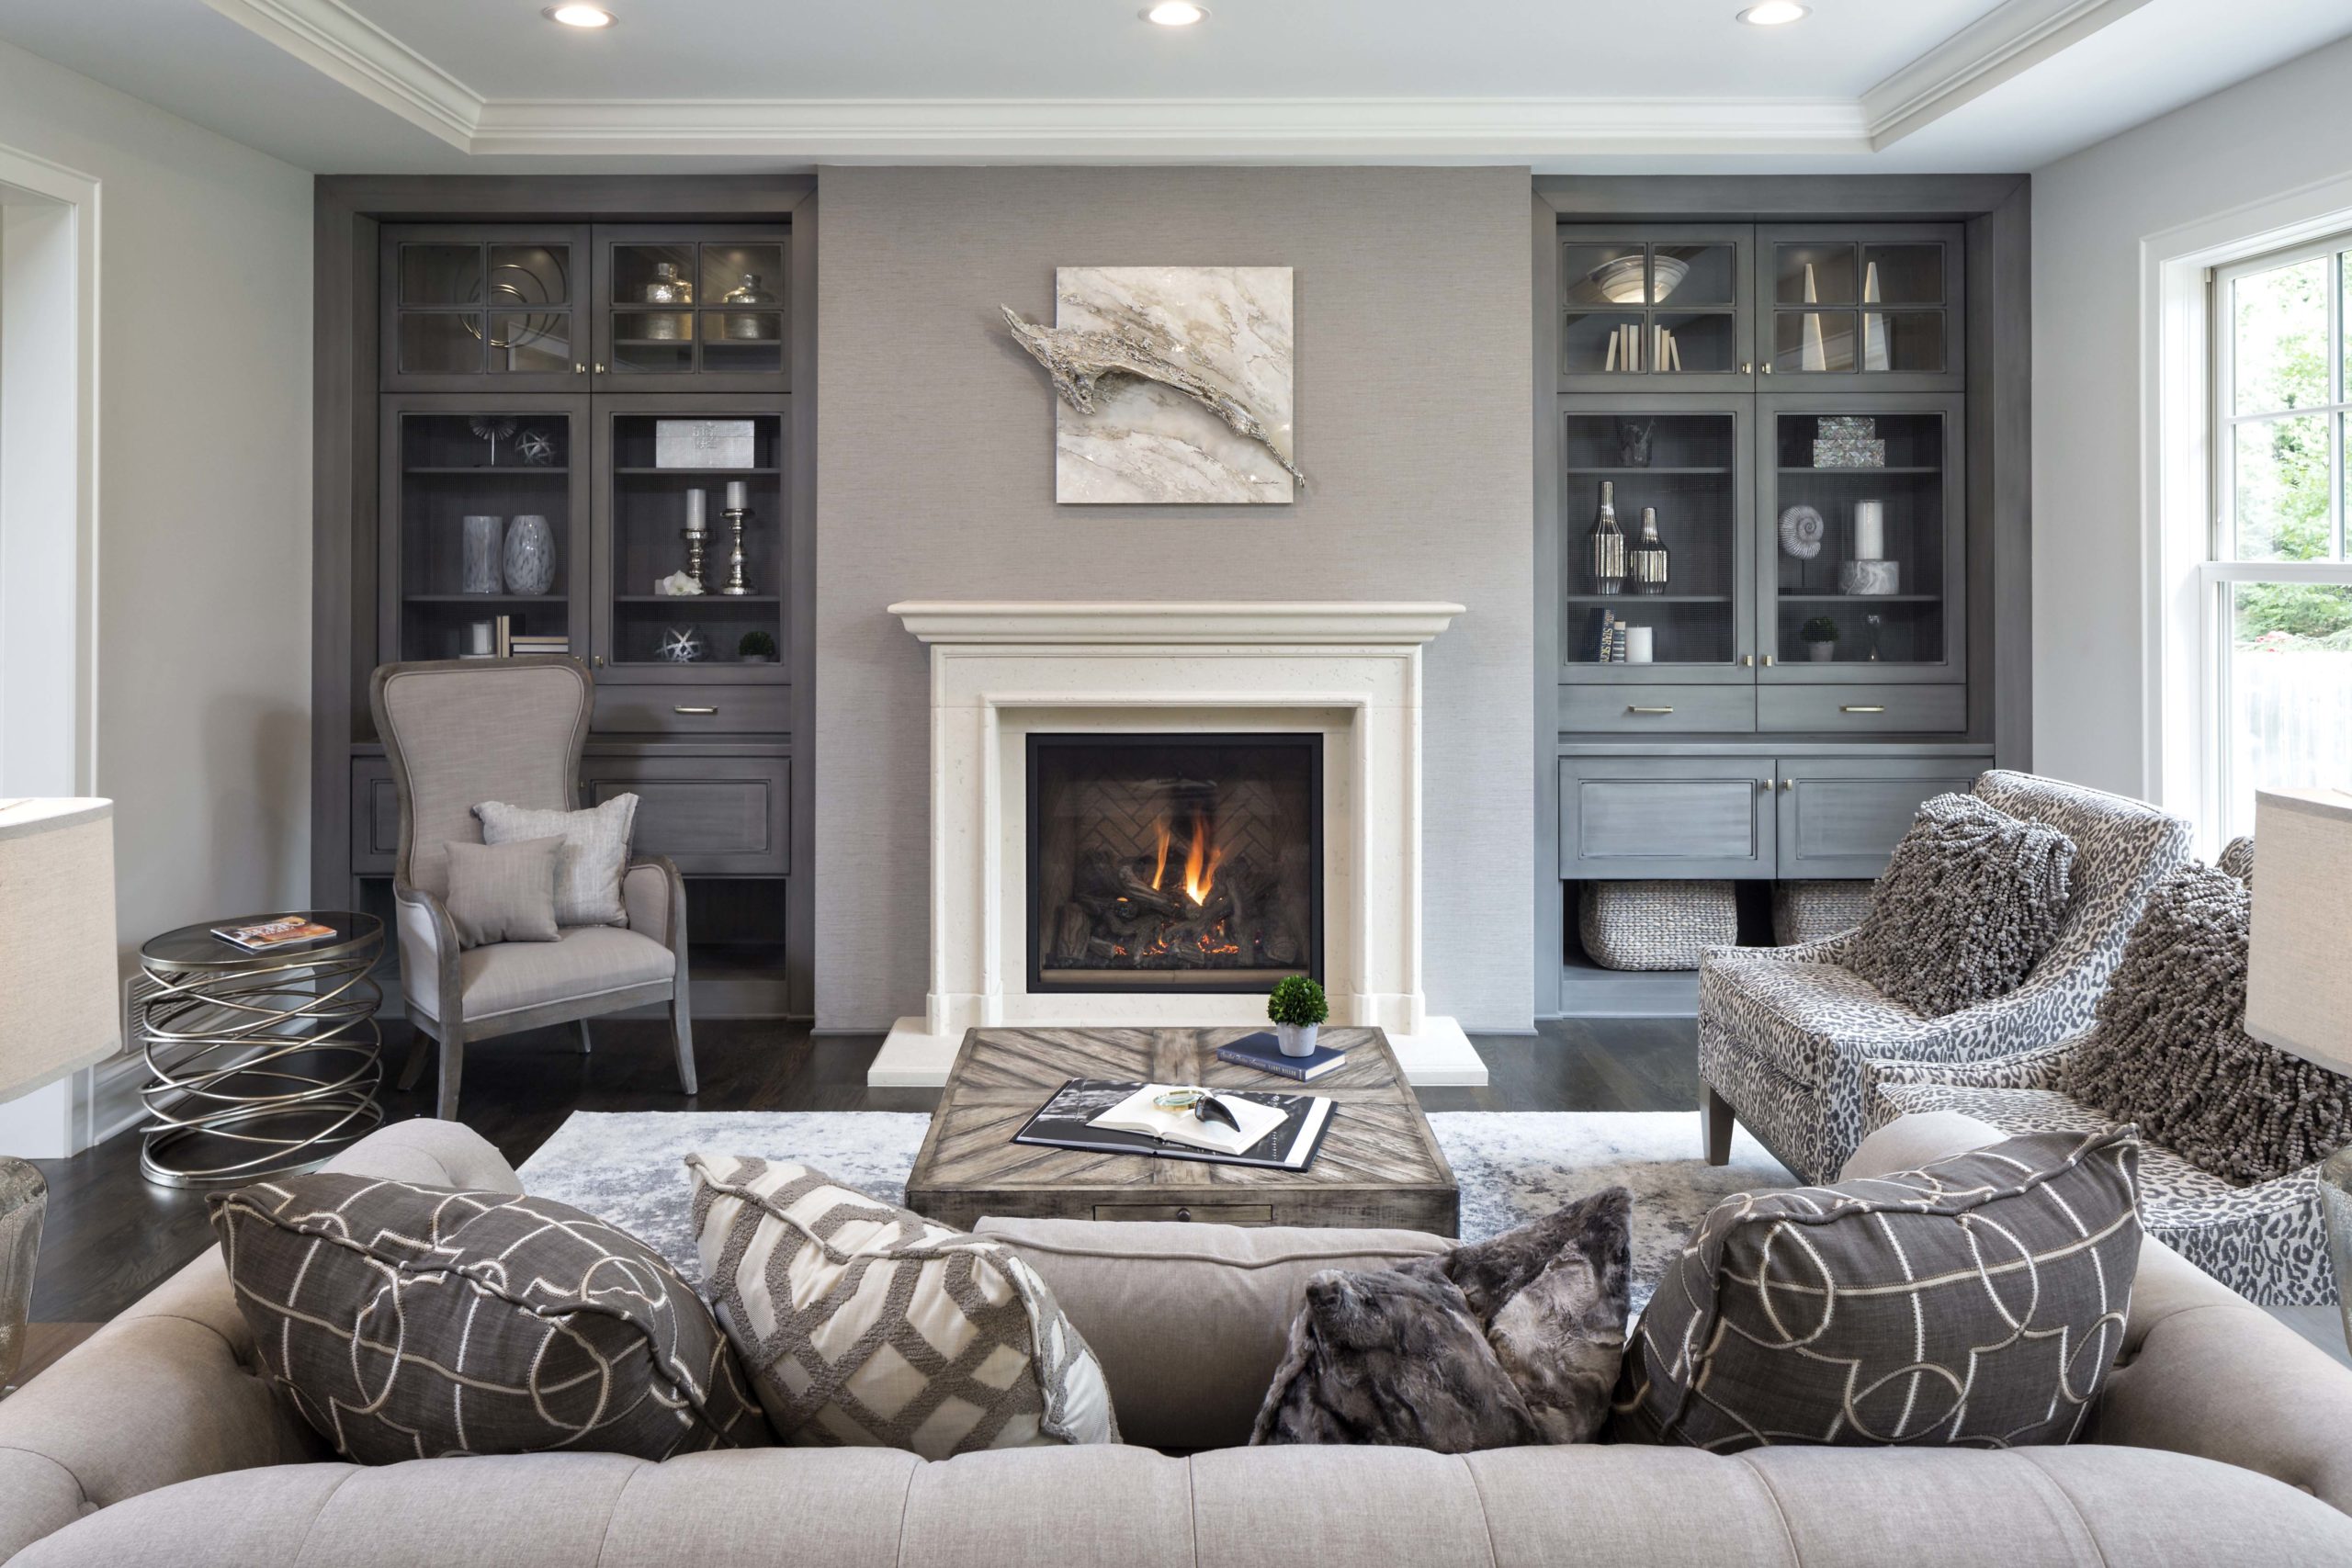 A living room with gray furniture and a fireplace.